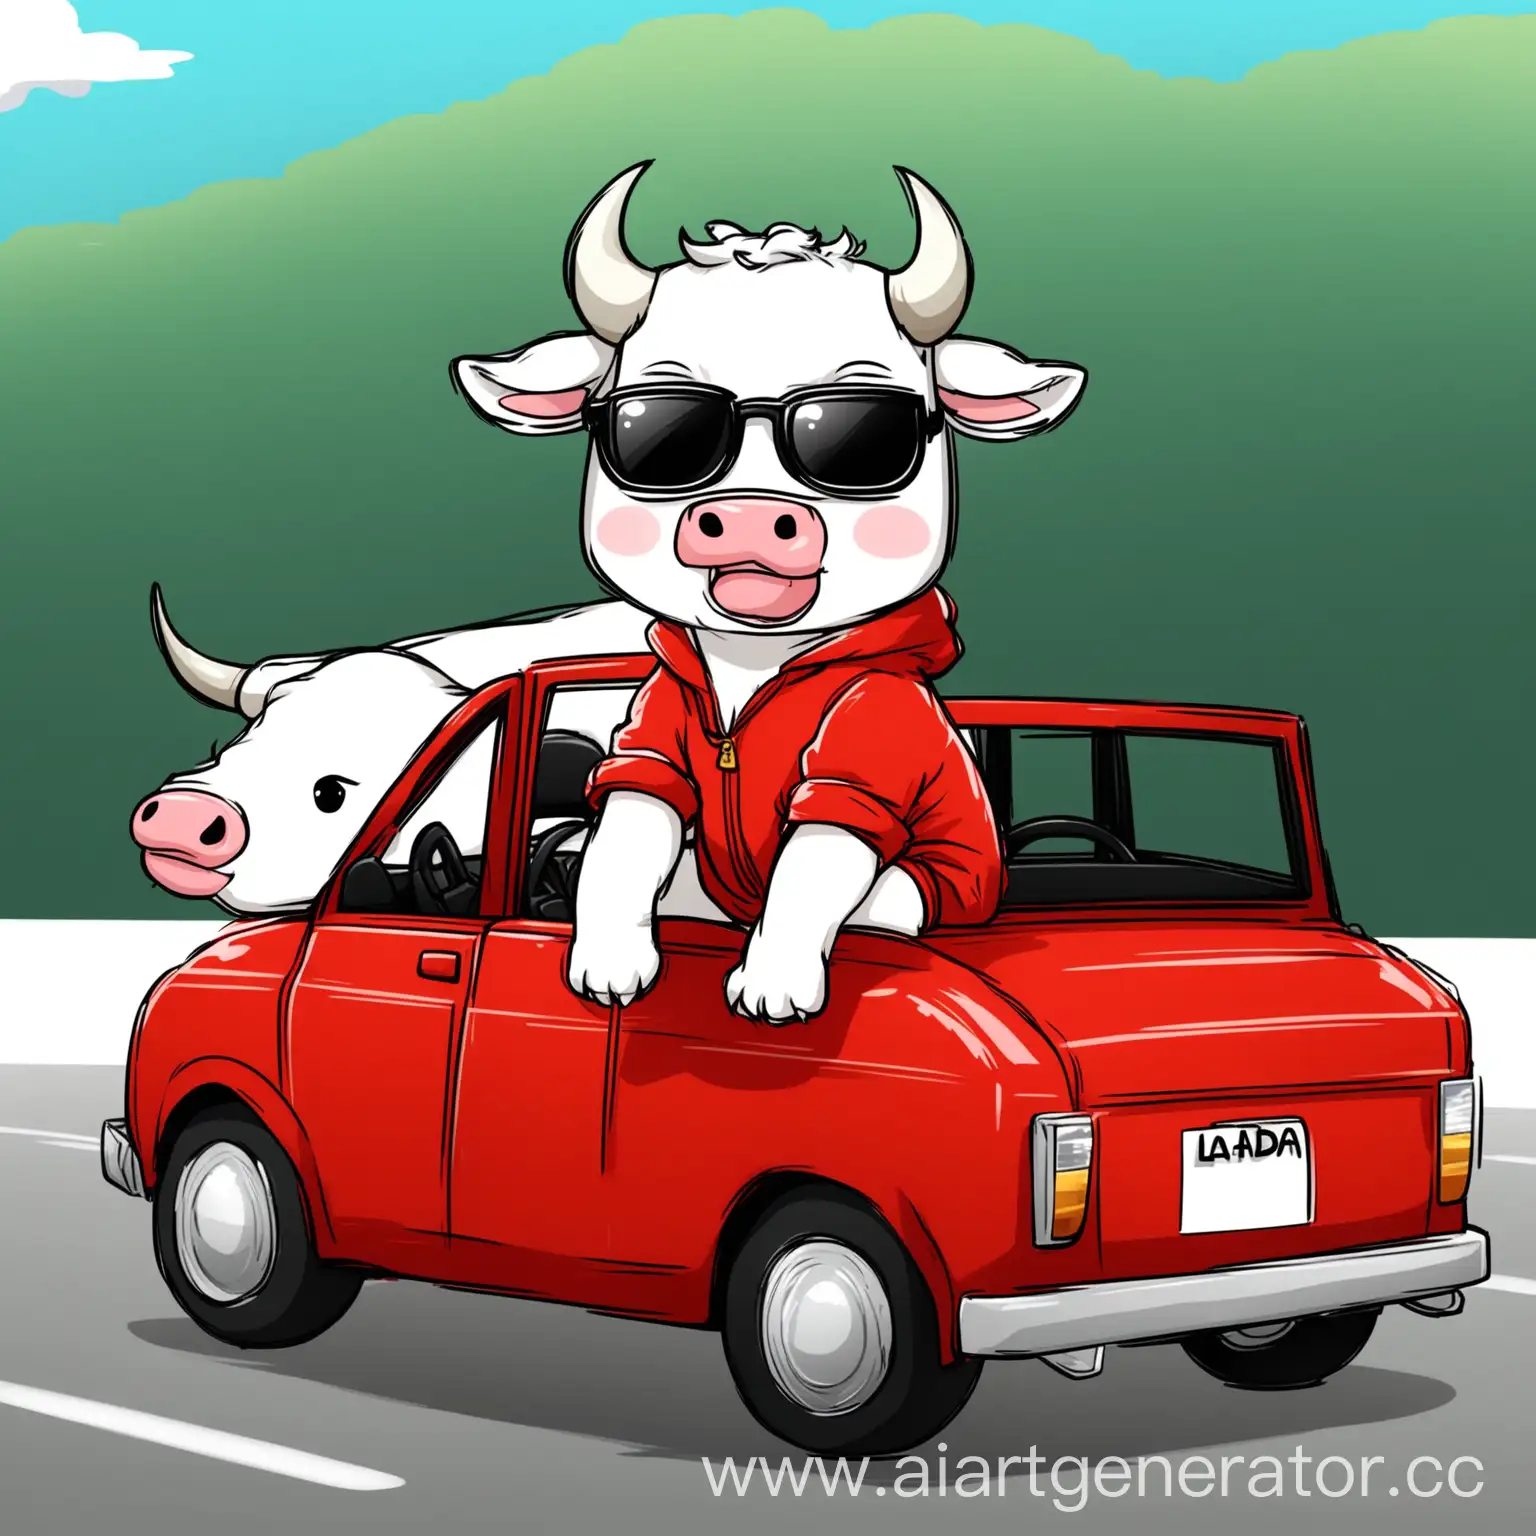 Chibi-Style-Cartoon-Bull-in-Red-Romper-Suit-Riding-in-Lada-with-Open-Roof-and-Sunglasses